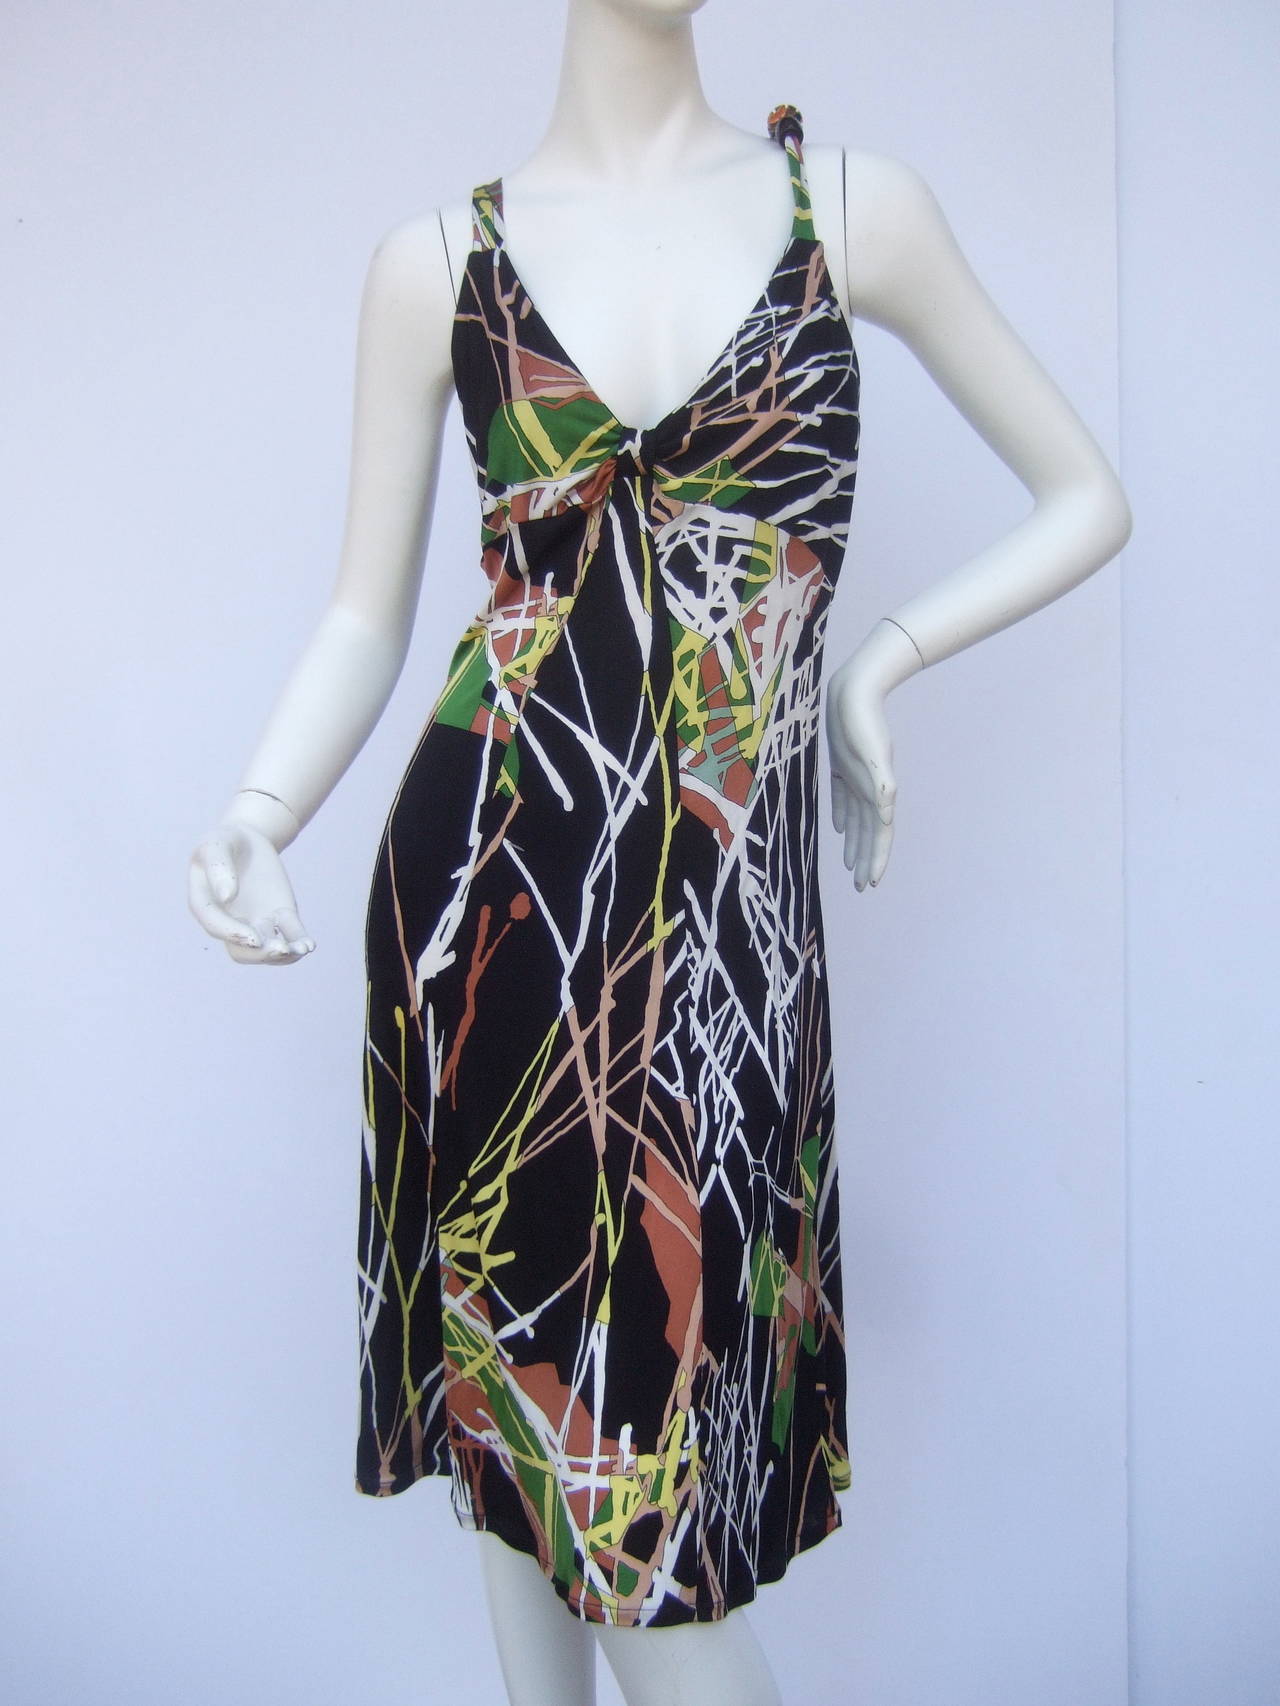 Missoni Abstract graphic print viscose slip dress US Size 12
The Italian dress is designed with collage of bold graphics 
The graphics illuminate against the stark black background 

The shoulder straps are accented with a few black & amber